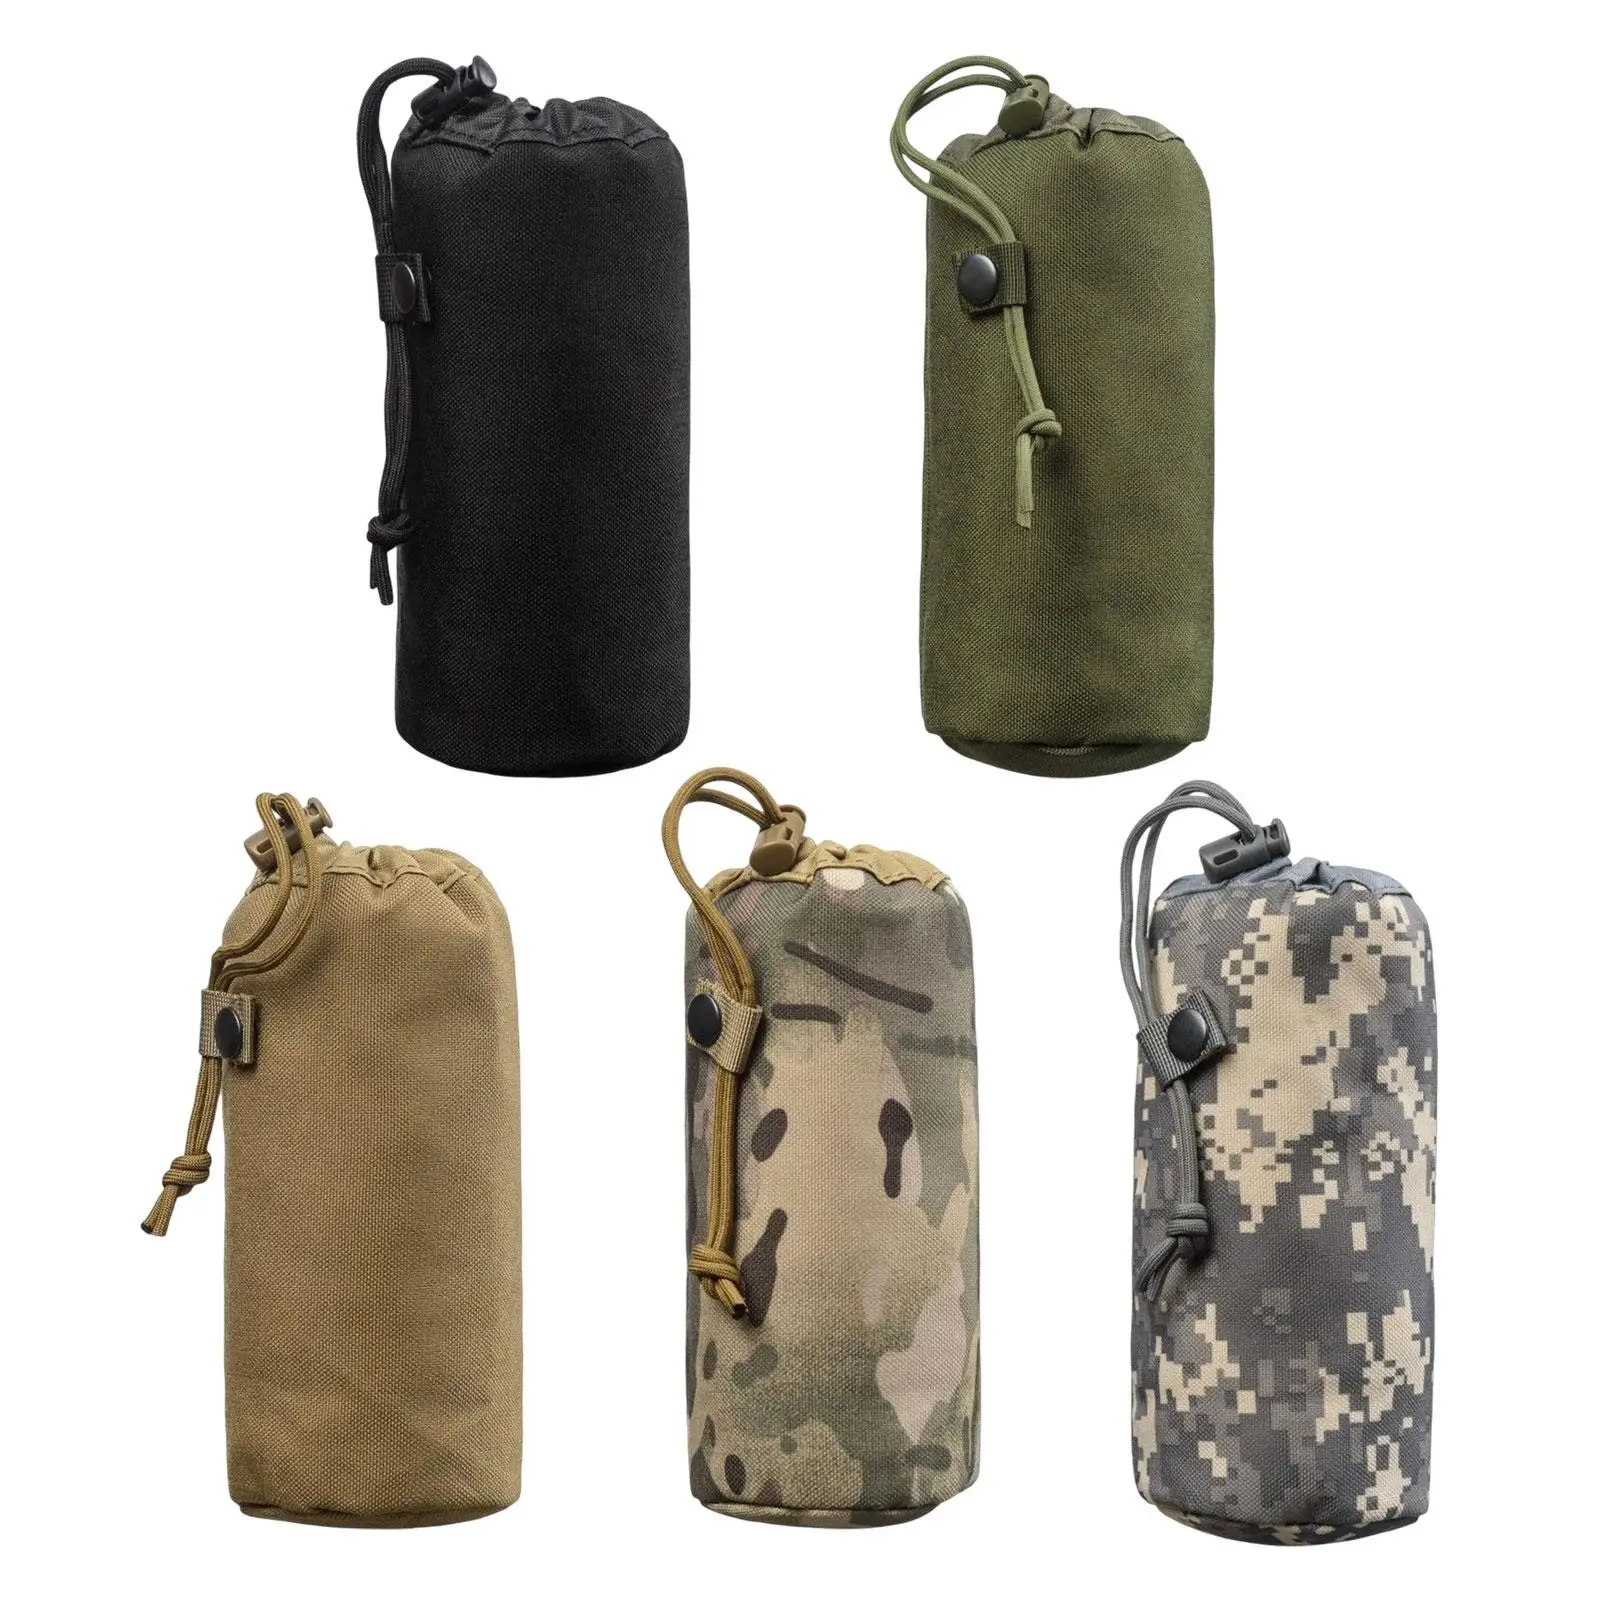 Portable Water Bottle Carrier Bag Drink Bottle Carrying Bag Protective Sleeve Cover Pouch for Outdoor Fishing Camping Hiking